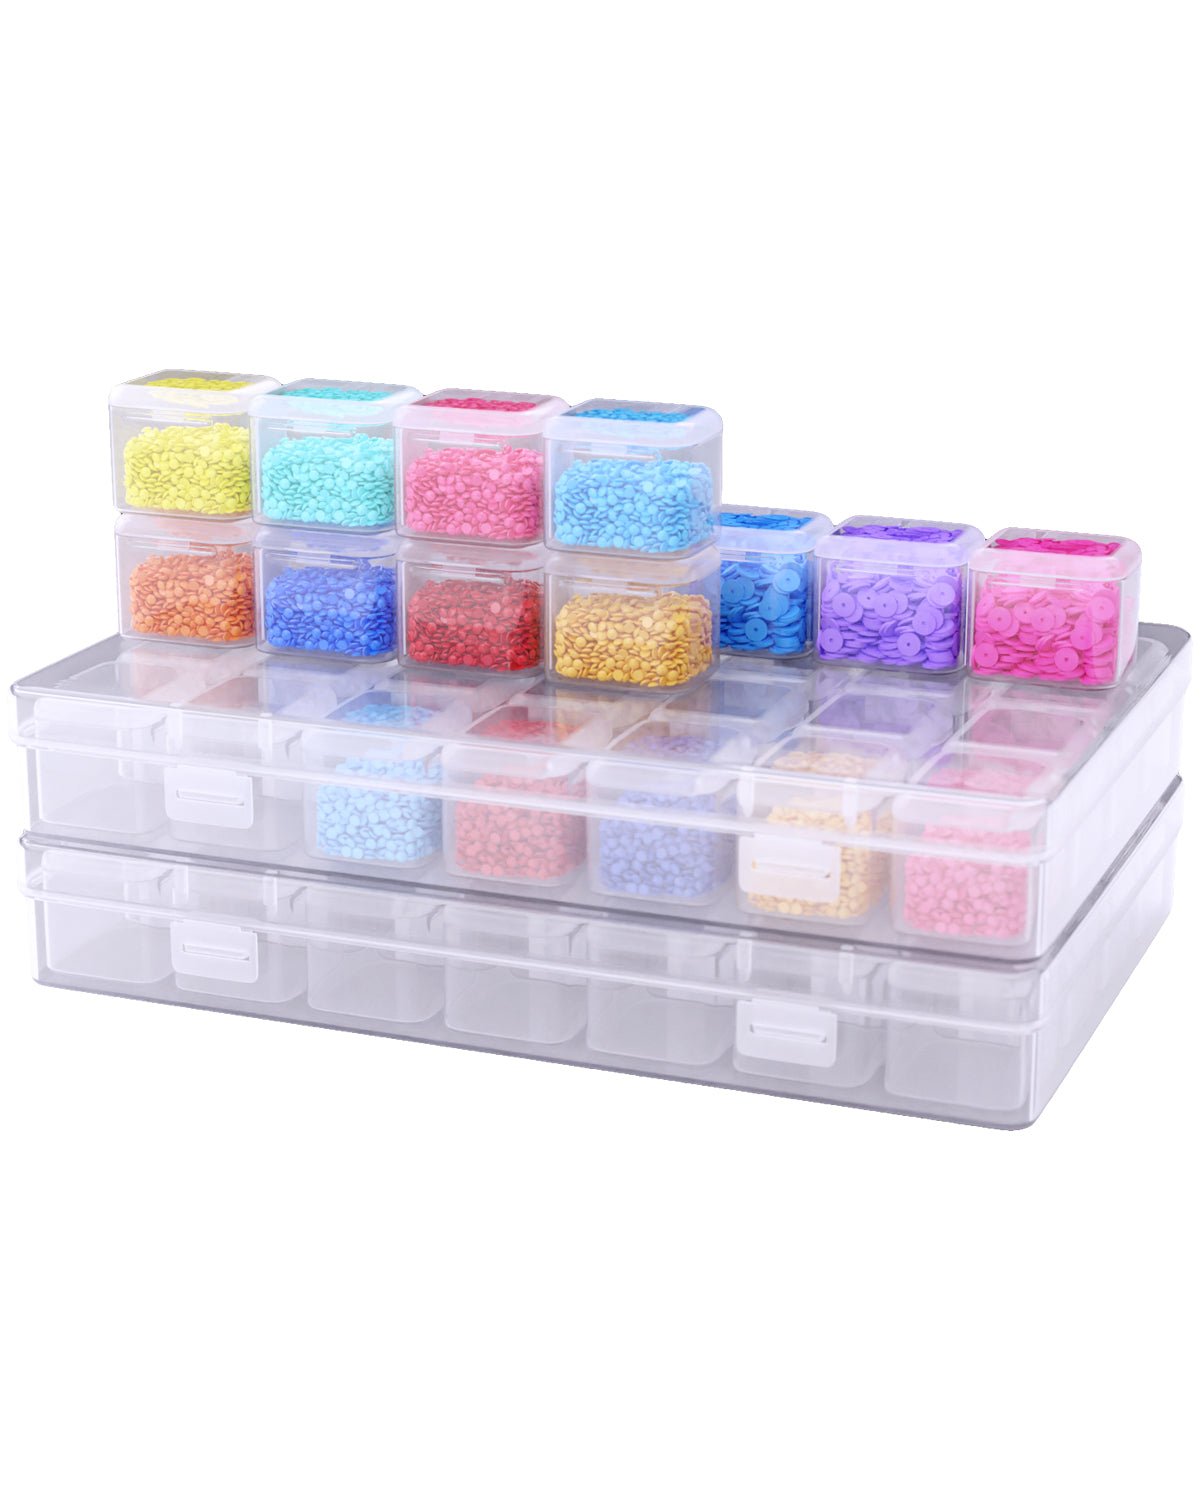 Diamond Painting Deutschland - Sorting box with 64 small cases